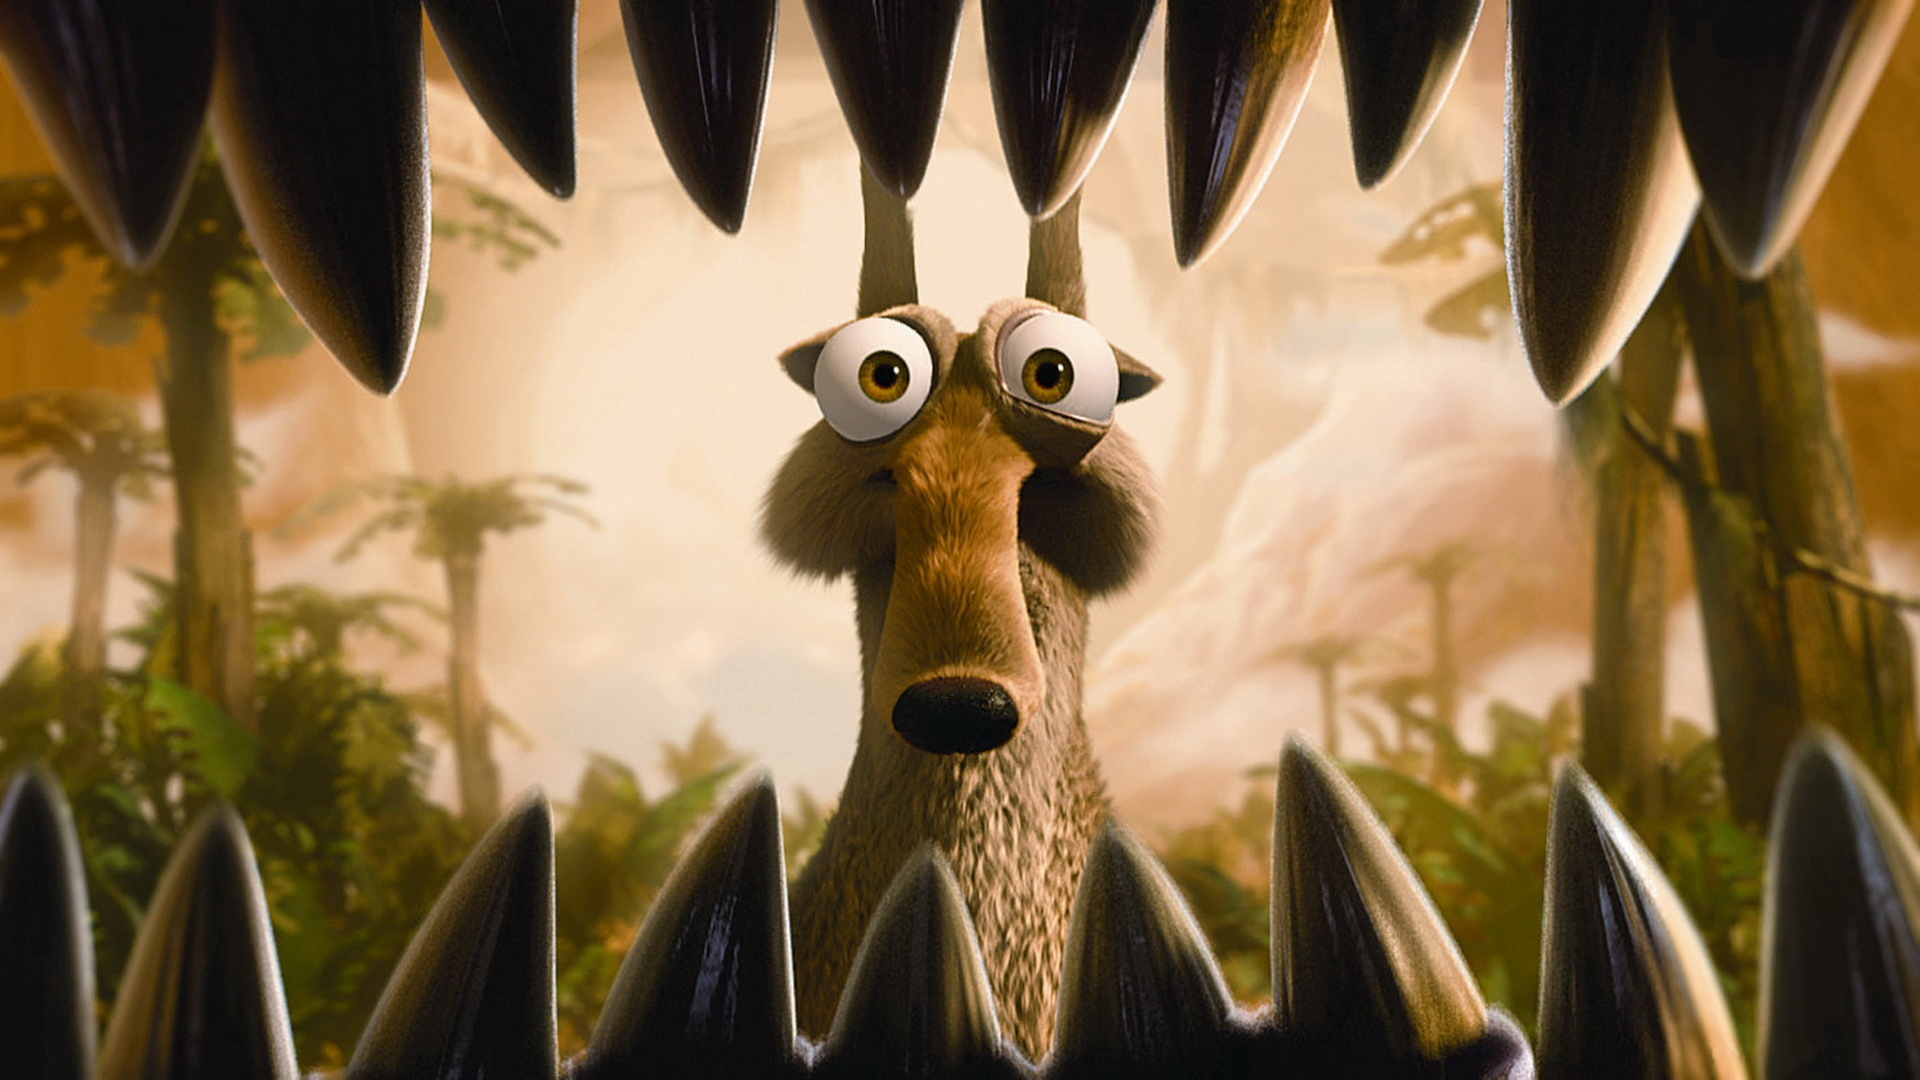 Movie Ice Age Dawn Of The Dinosaurs 1920x1080